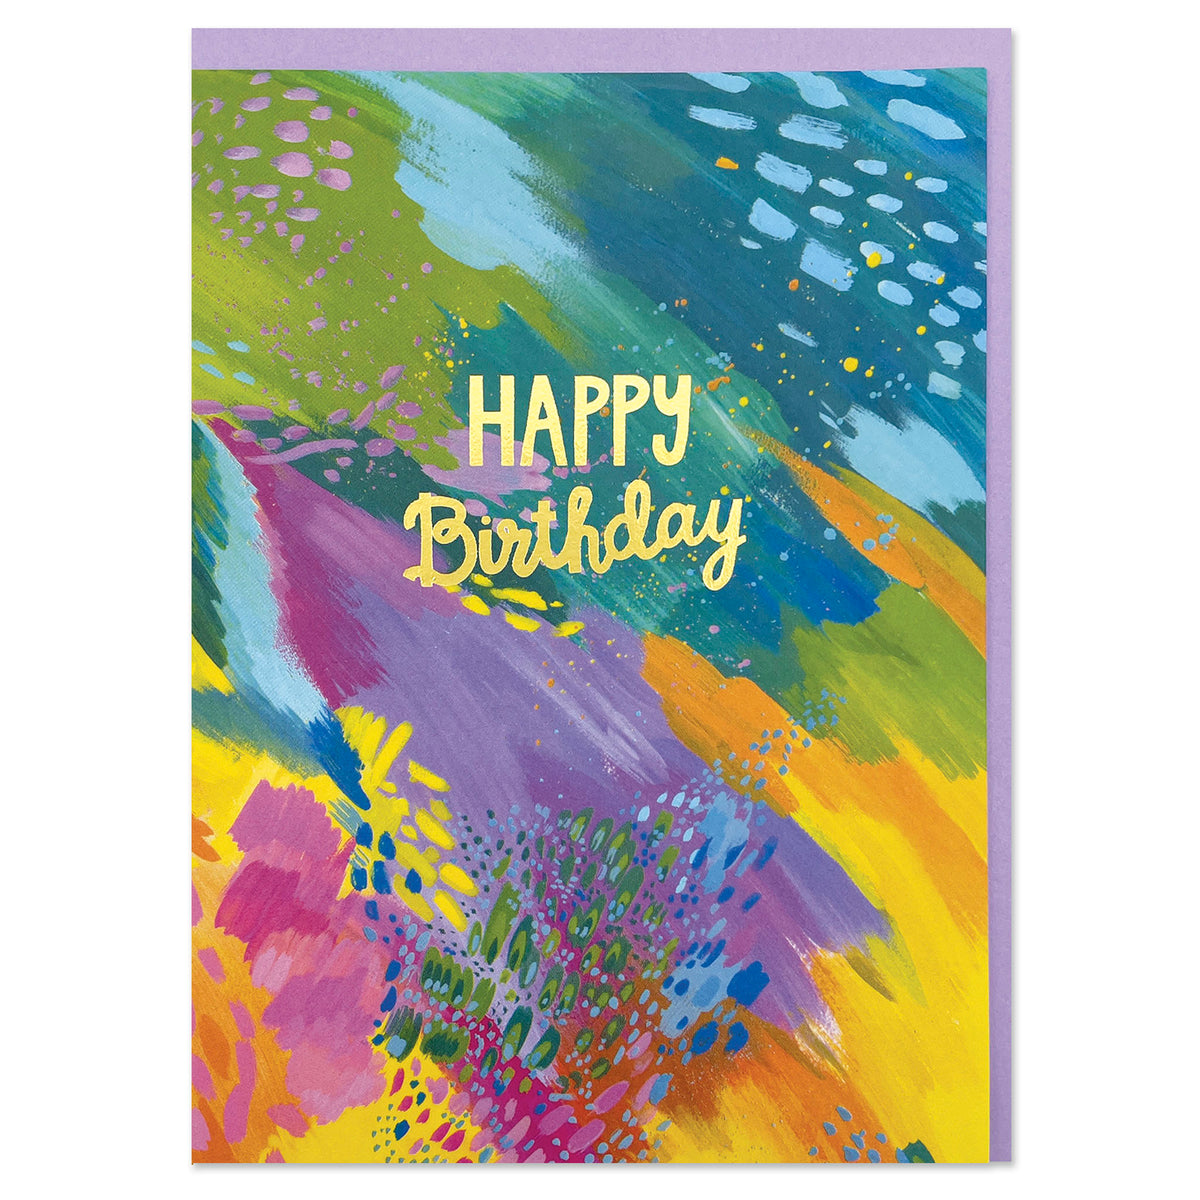 A colourful abstract painted greetings card to celebrate a birthday. The writing in the centre of the card is gold foil cursive writing stating &#39;Happy Birthday&#39;.